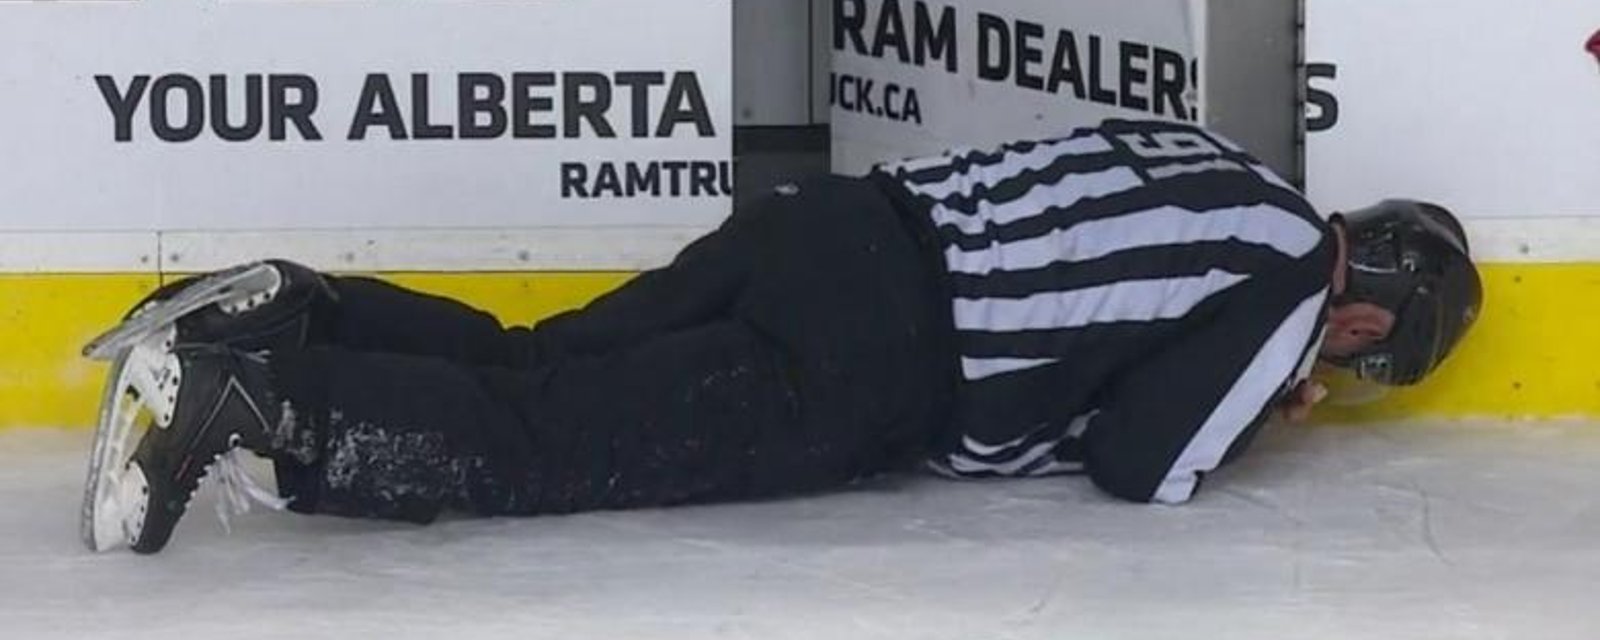 BREAKING: The NHL has come down hard on Dennis Wideman for hitting an official.